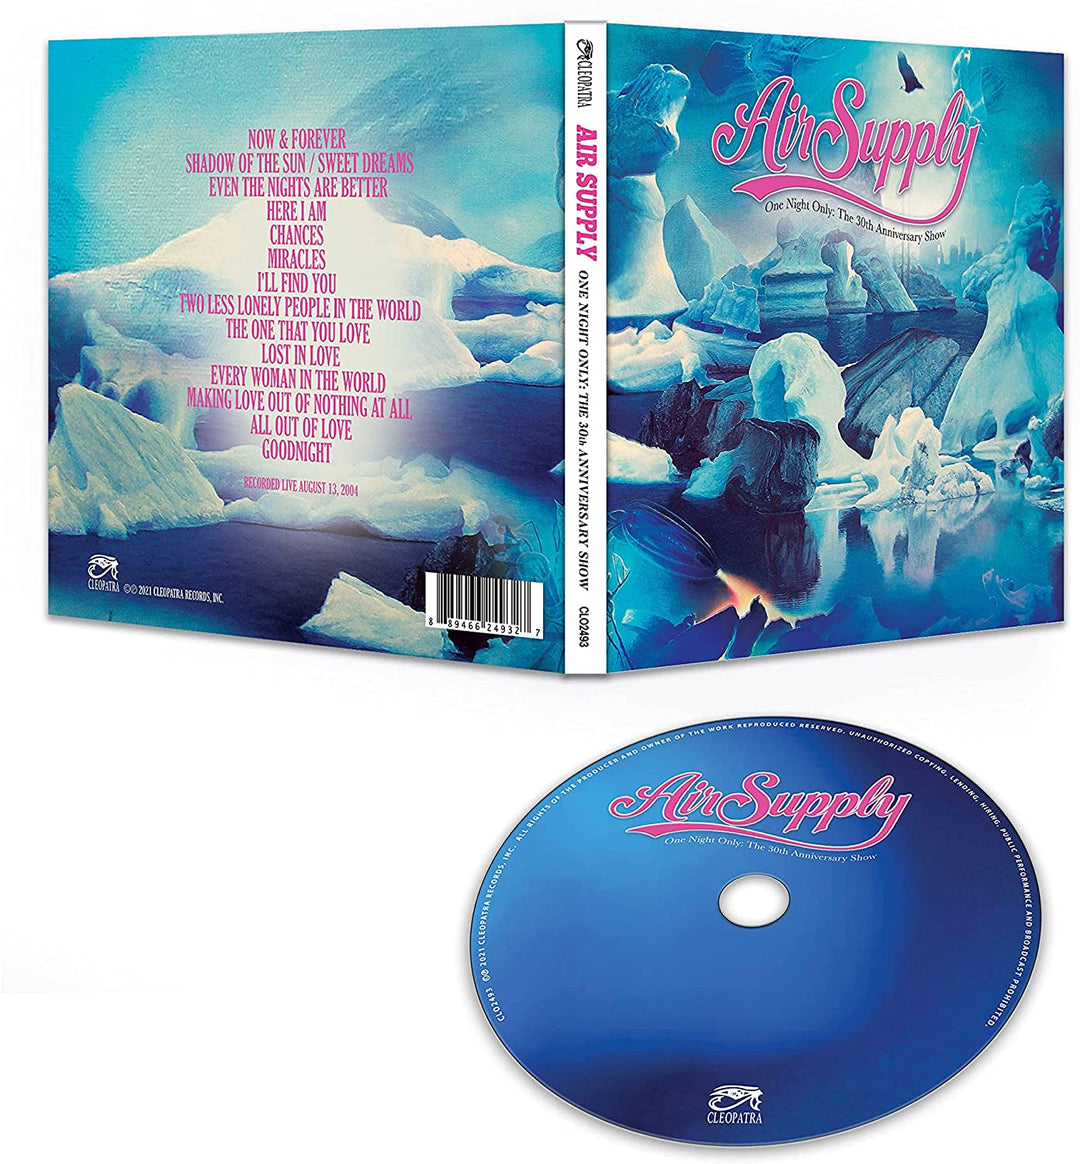 Air Supply – One Night Only – The 30th Anniversary Show [Audio CD]